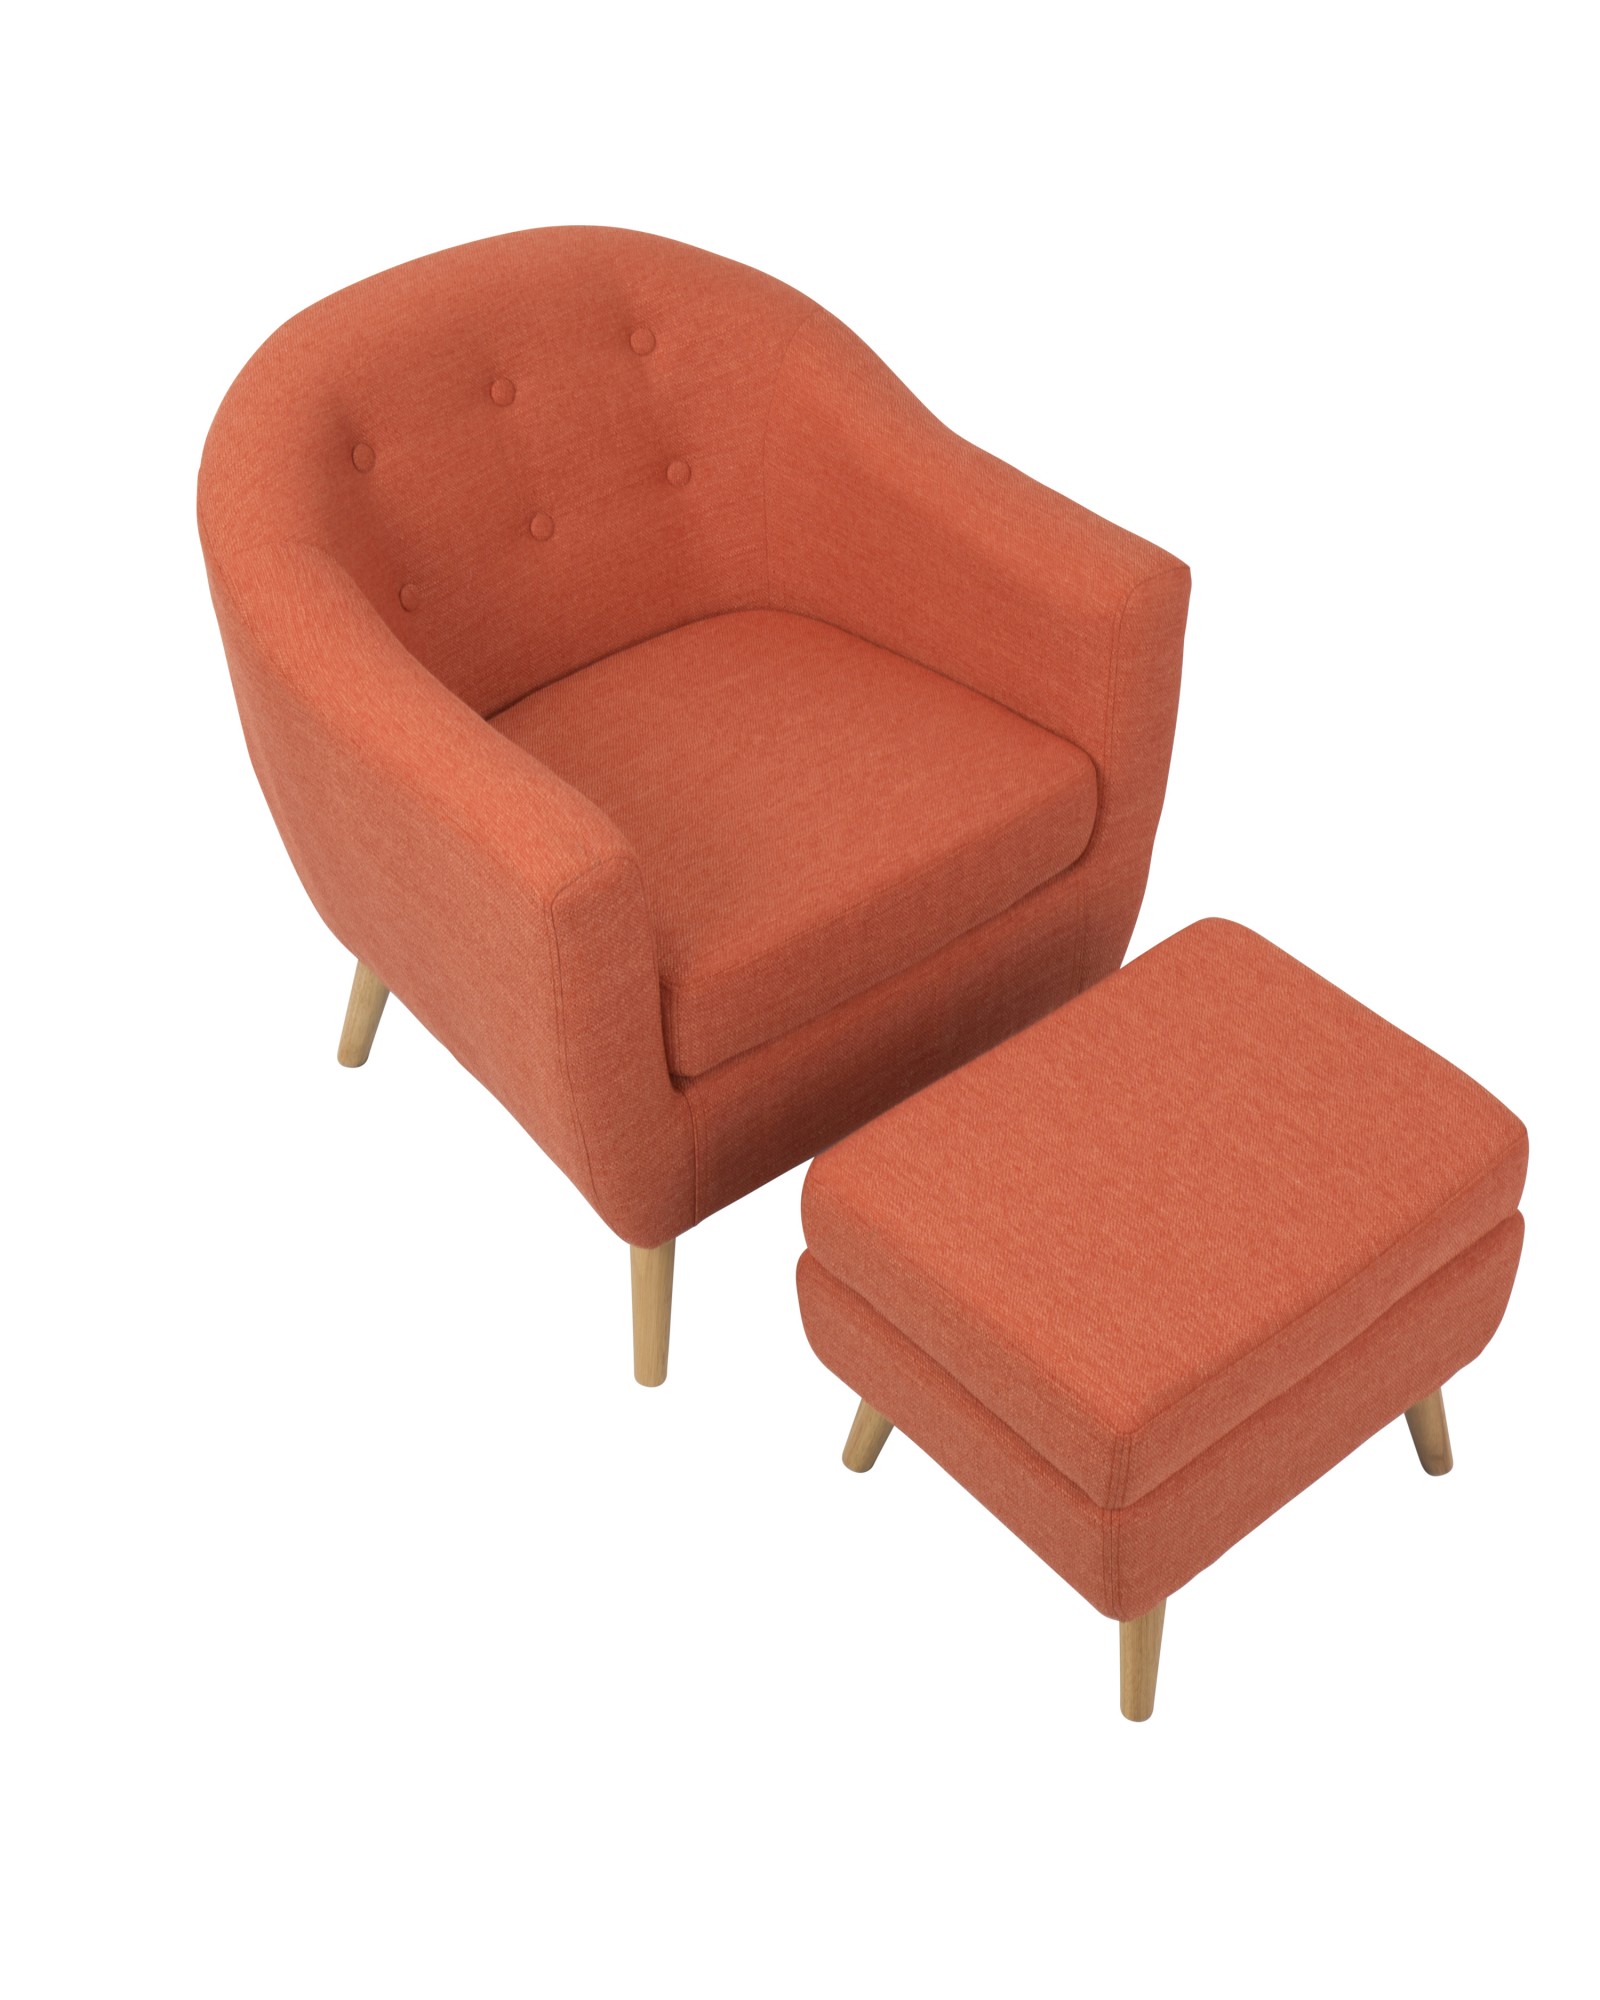 Rockwell Mid-Century Modern Accent Chair and Ottoman in Orange